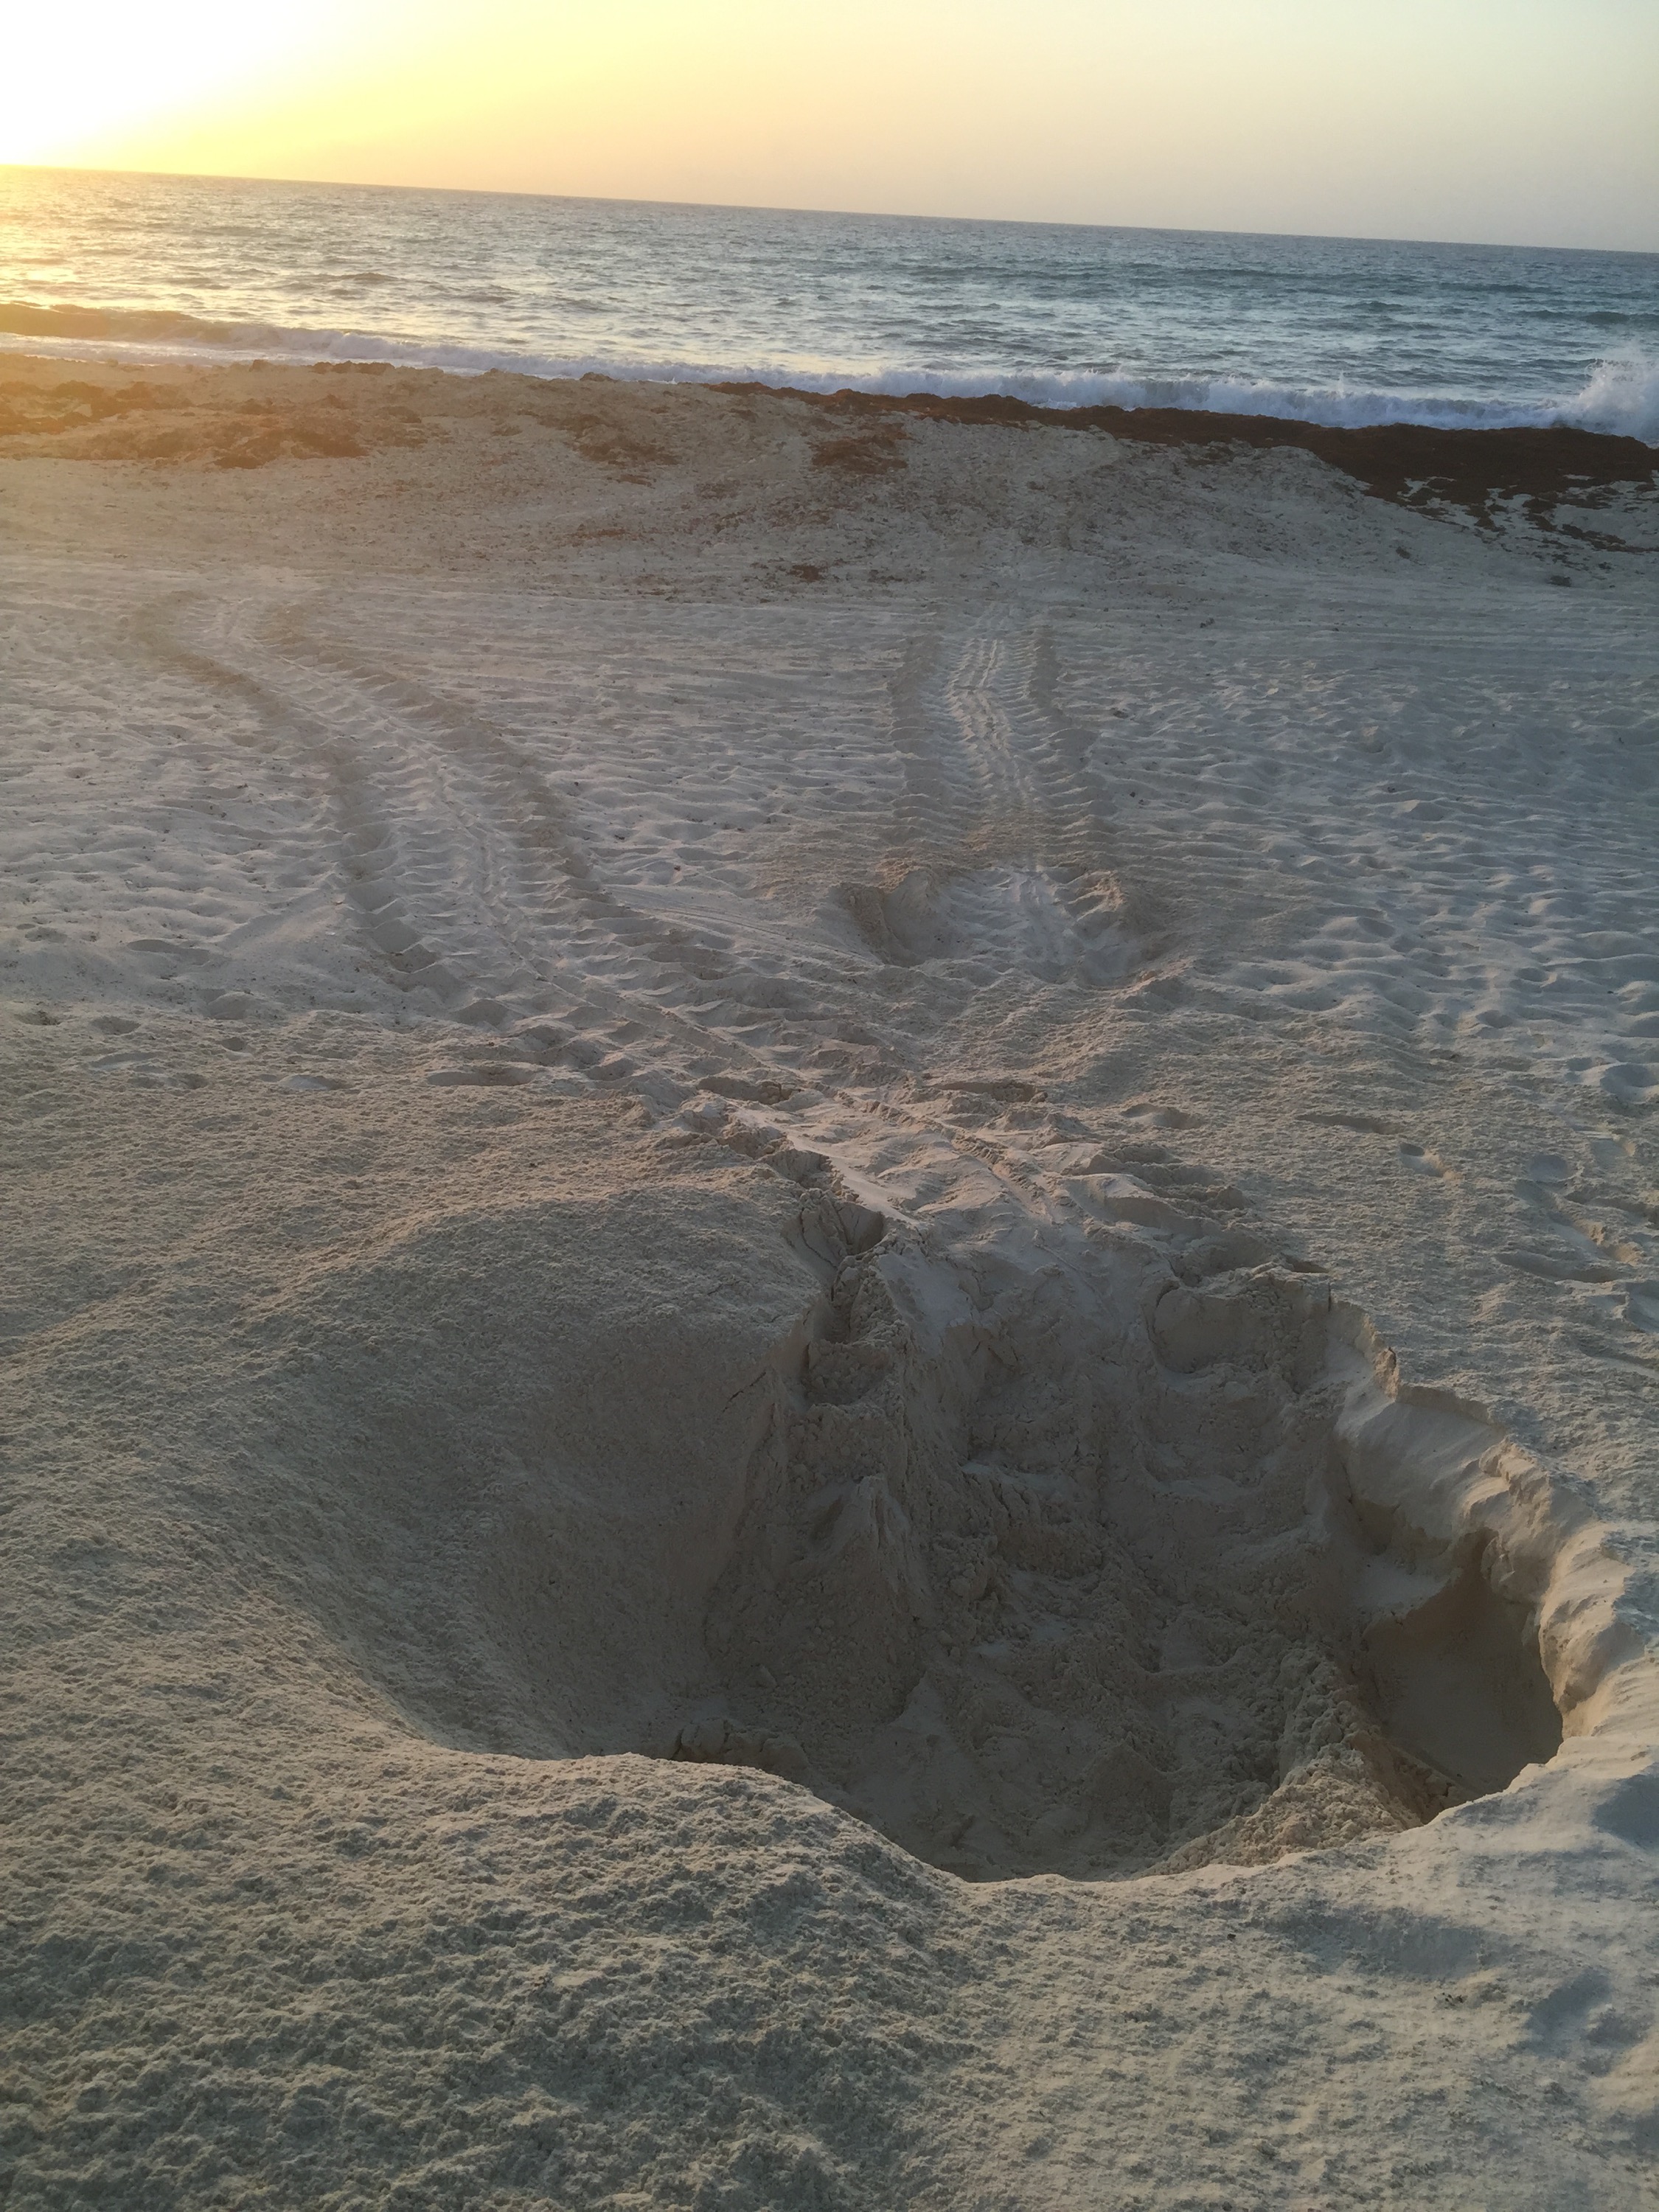 Sea turtle tracks leading to the beach where a female laid her eggs, then returned to the ocean. Photo copyright Valerie Duty Citrano